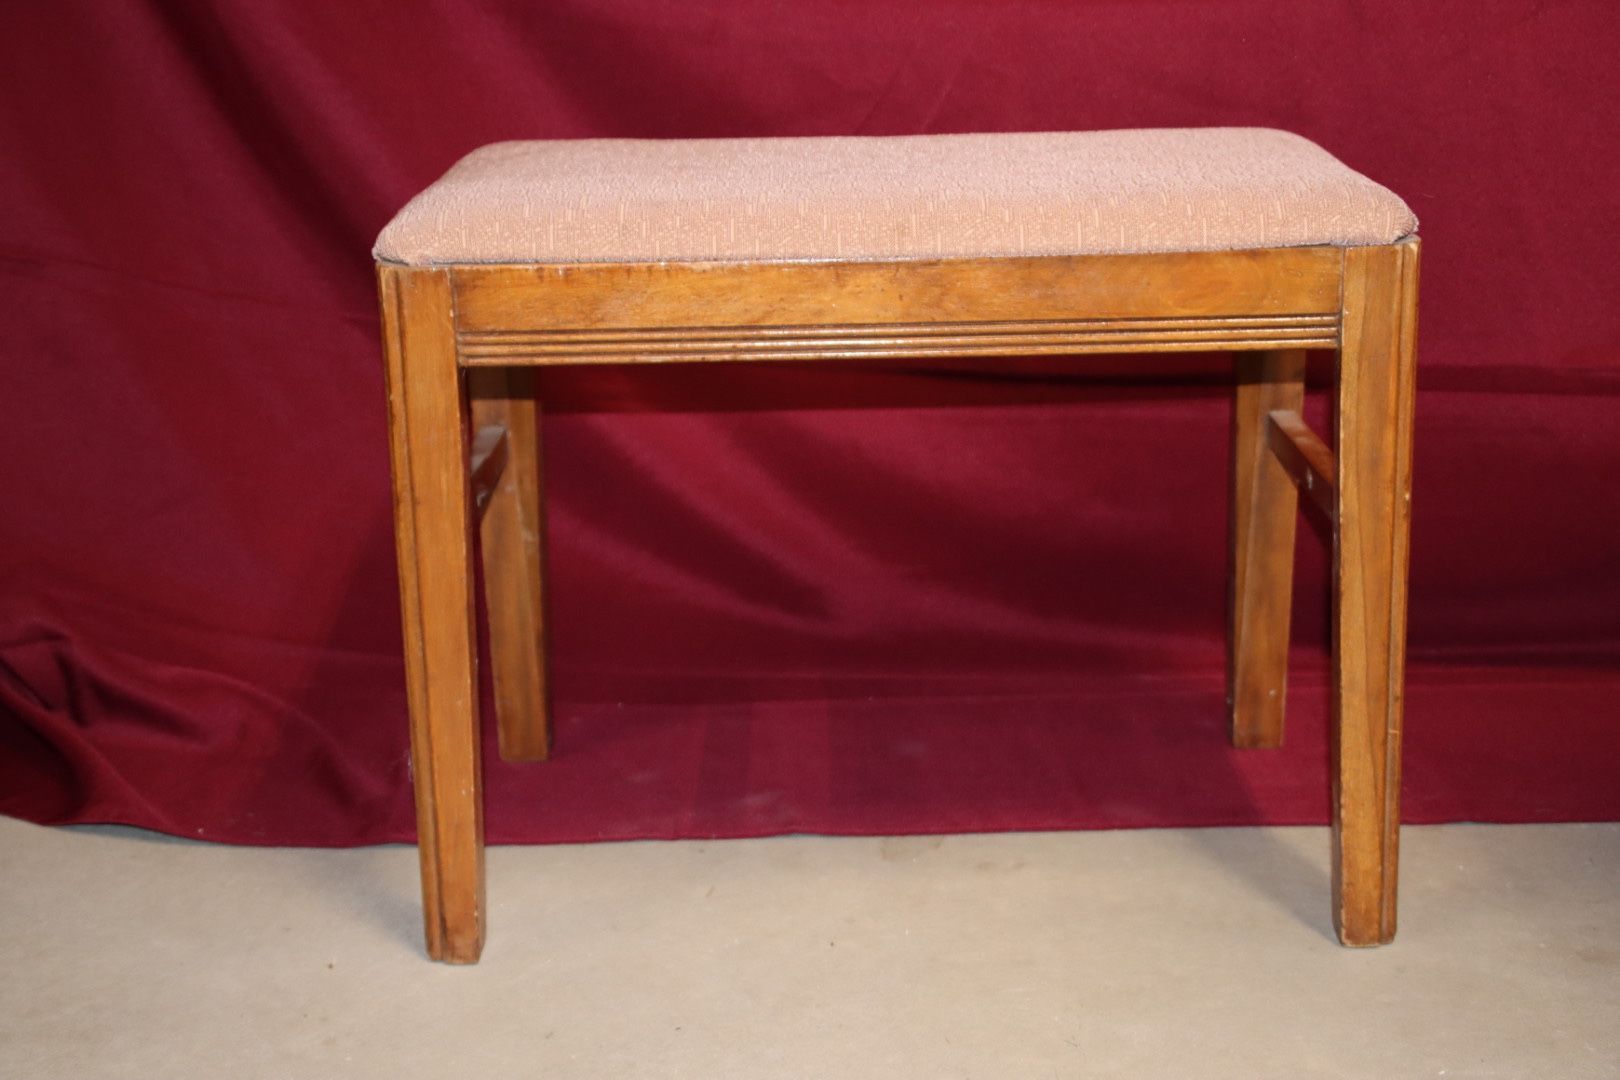 Antique Footstool/Bench